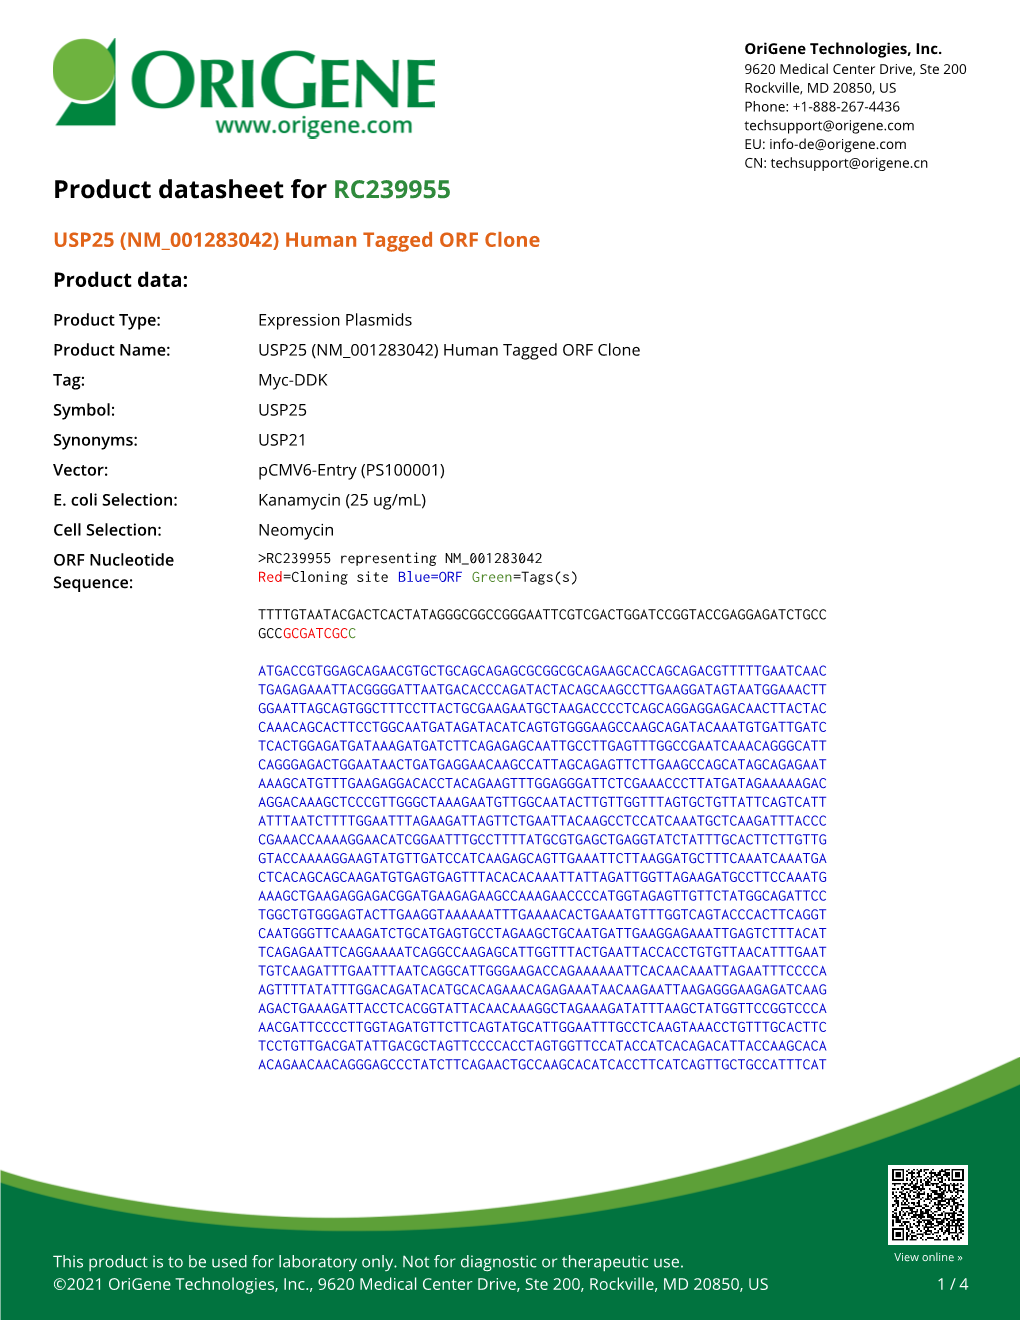 USP25 (NM 001283042) Human Tagged ORF Clone Product Data